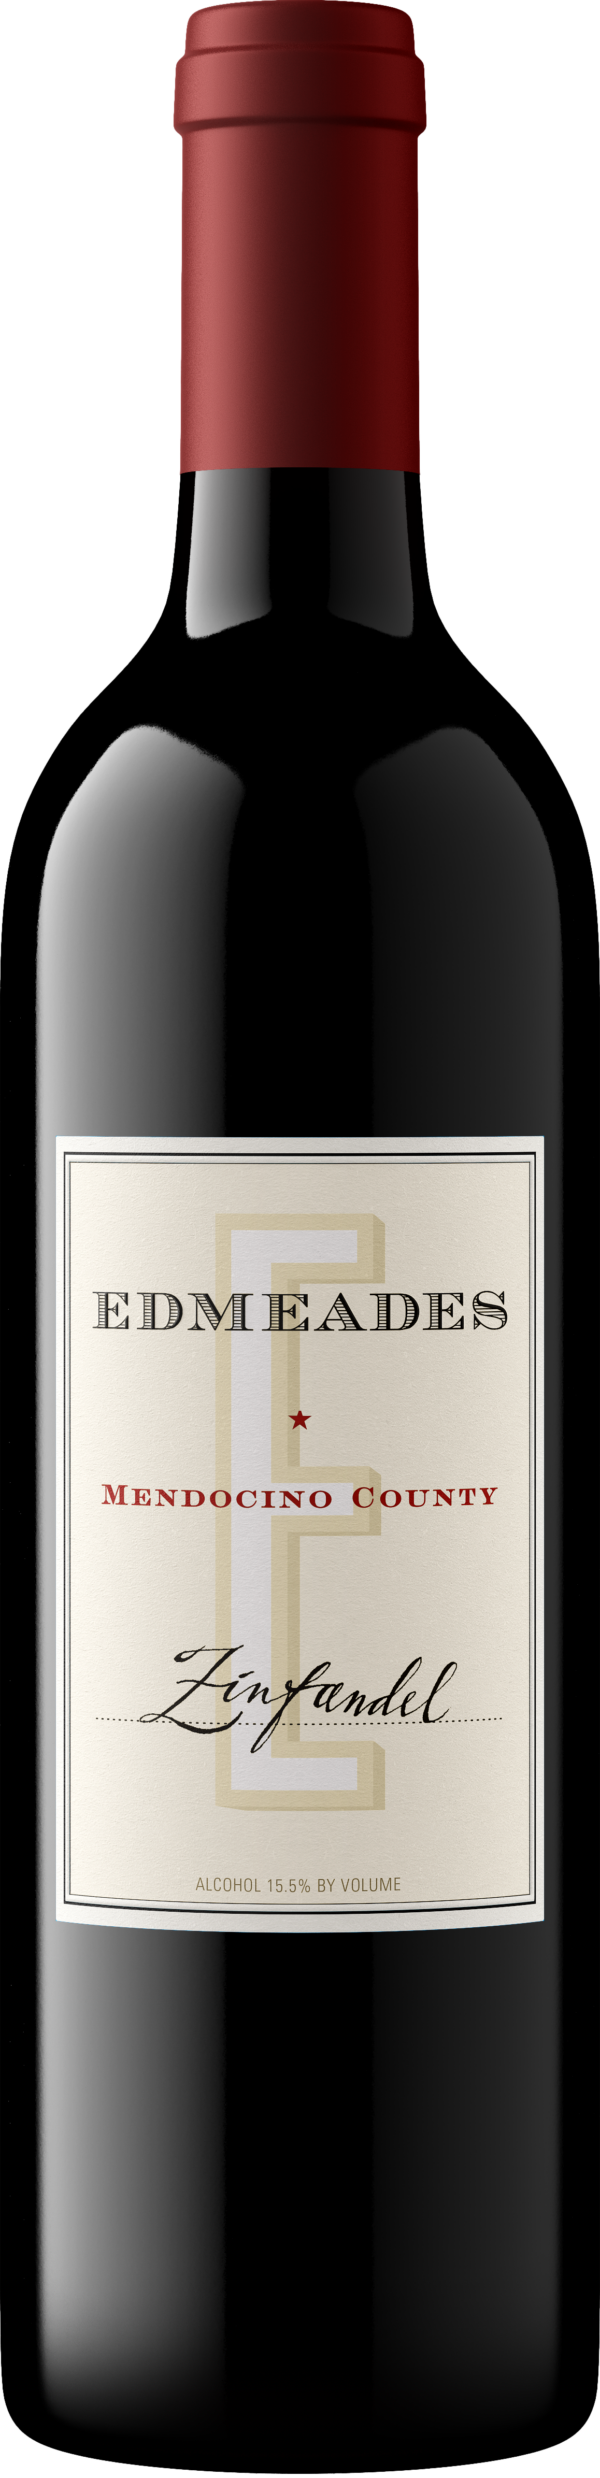 Product image of Edmeades Mendocino Zinfandel 2016 from 8wines